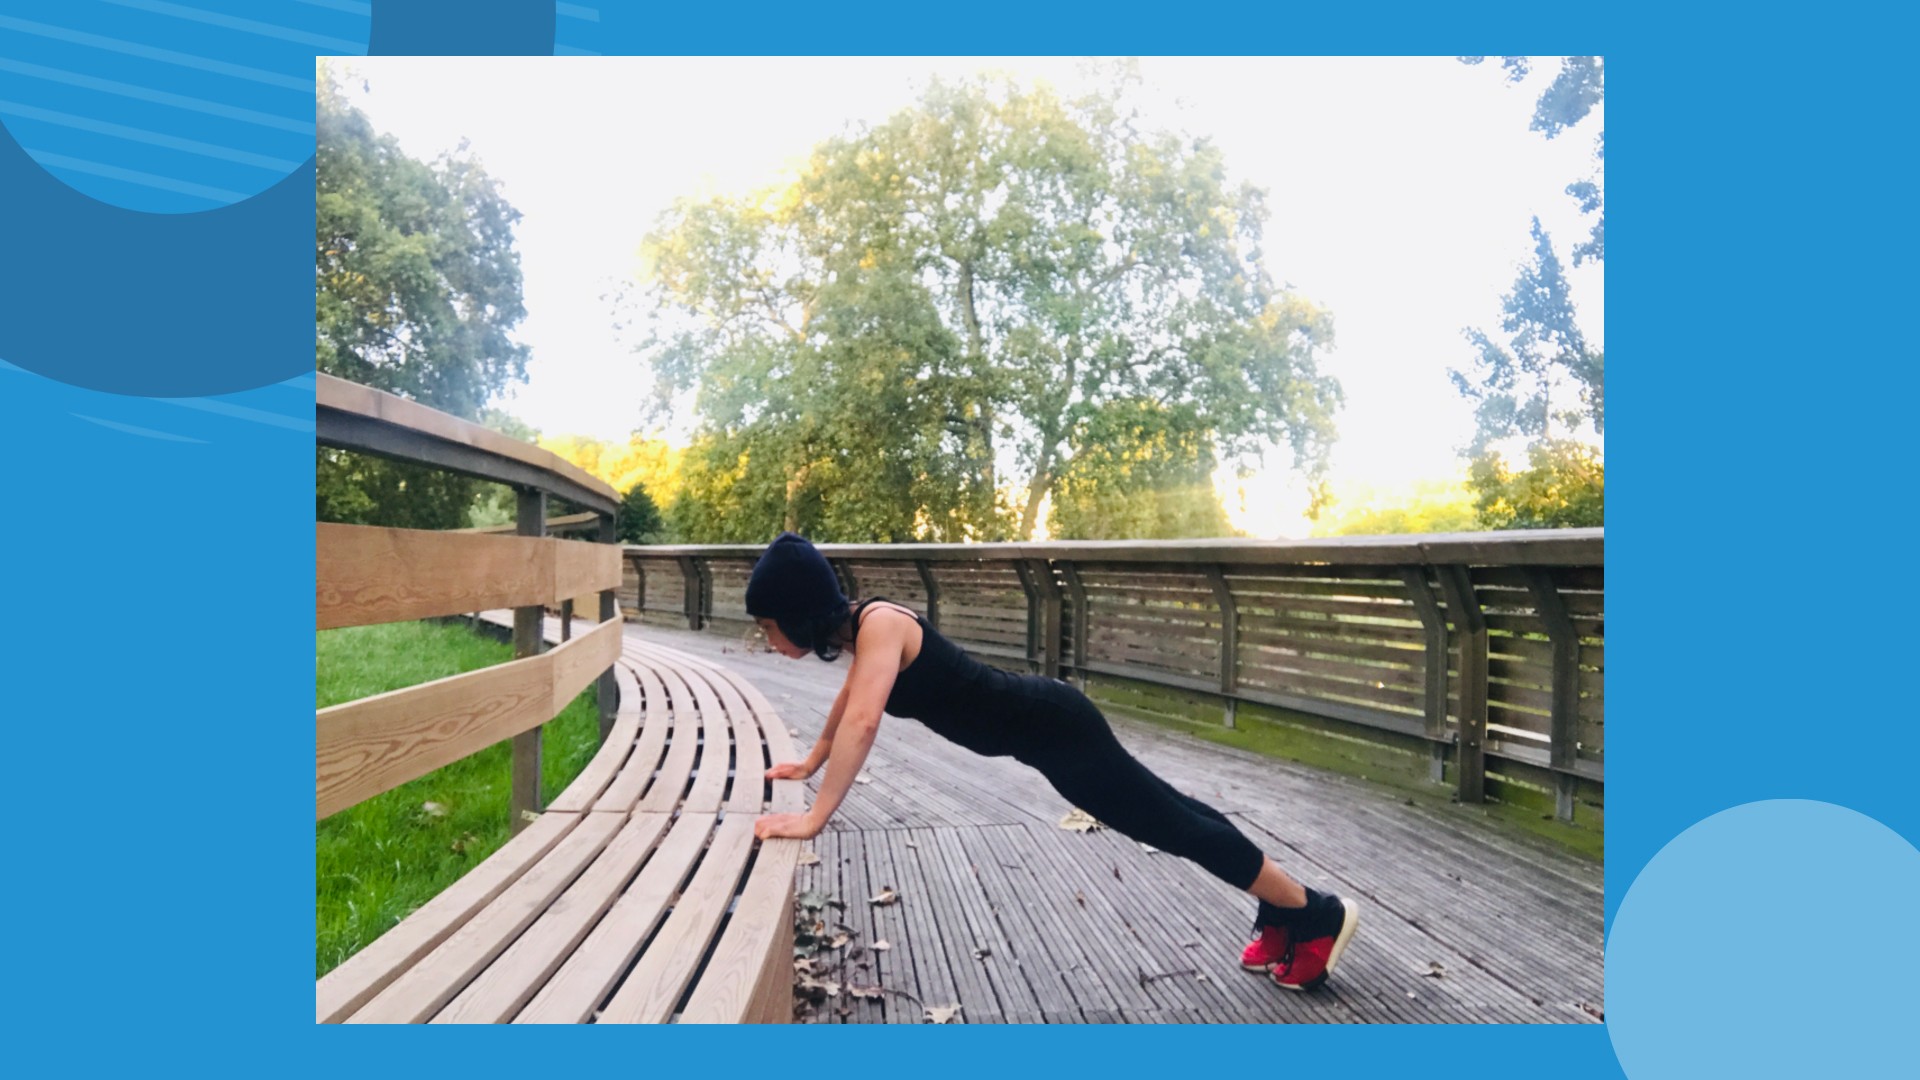 Do your workout at the park! This 20 minute routine will work your whole  body